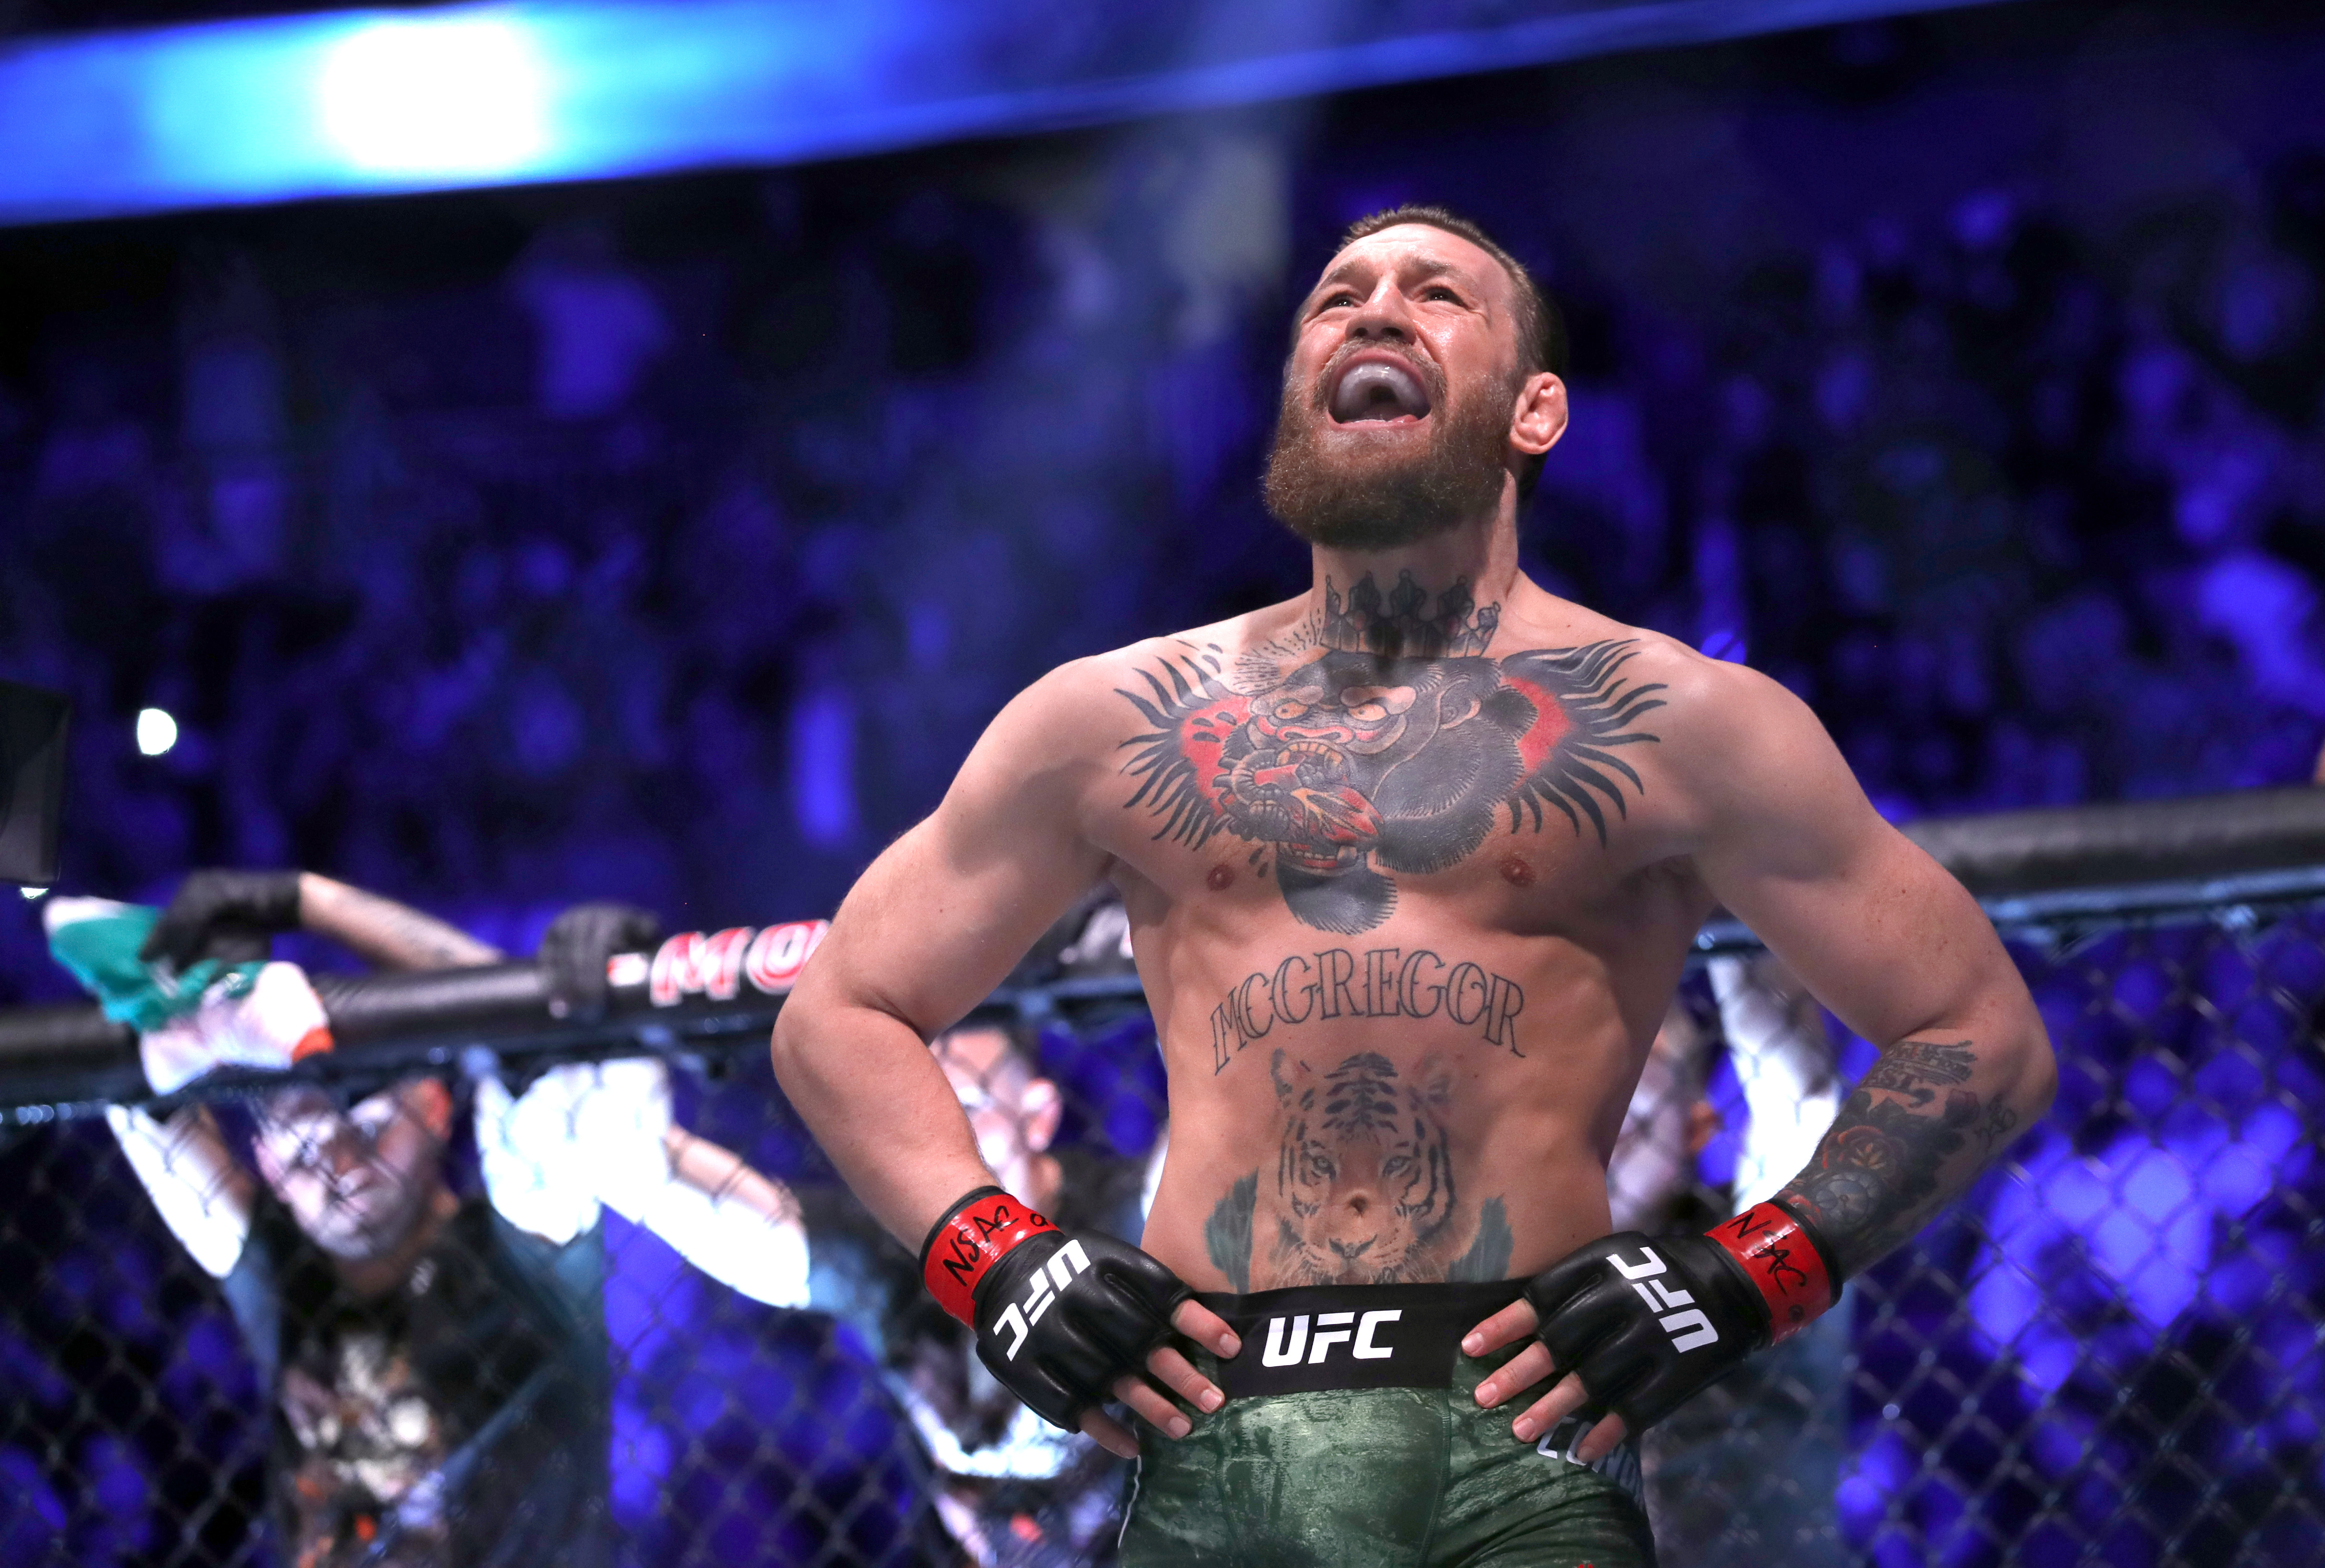 Conor McGregor’s Nutritionists Shocked His Coach: ‘No Way He’s Gonna Be Able to Eat All This Food’